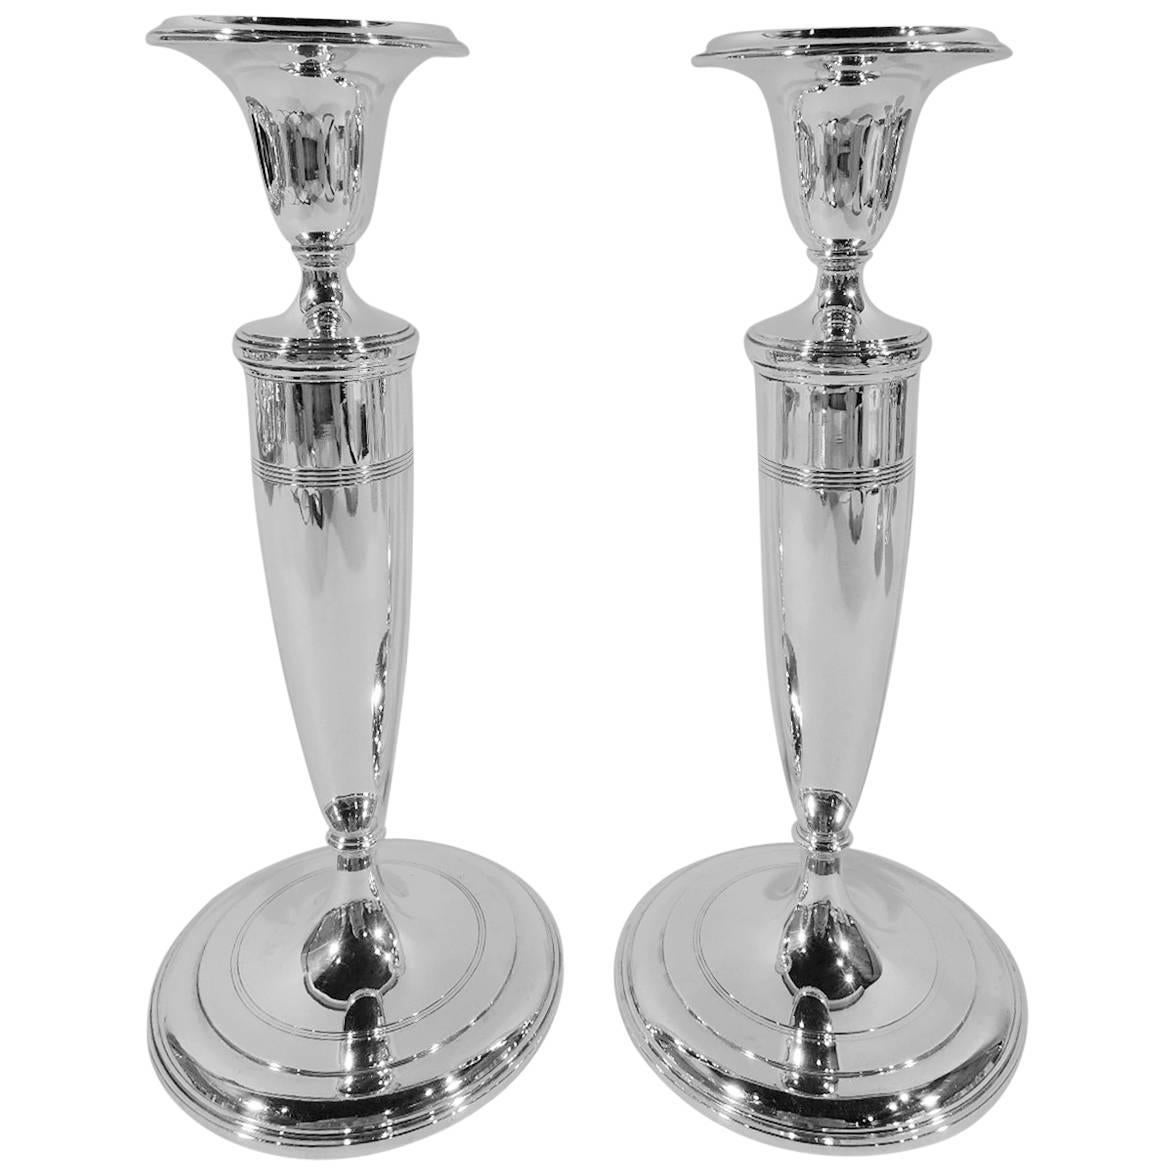 Pair of Classic Modern Sterling Silver Candlesticks by Tiffany